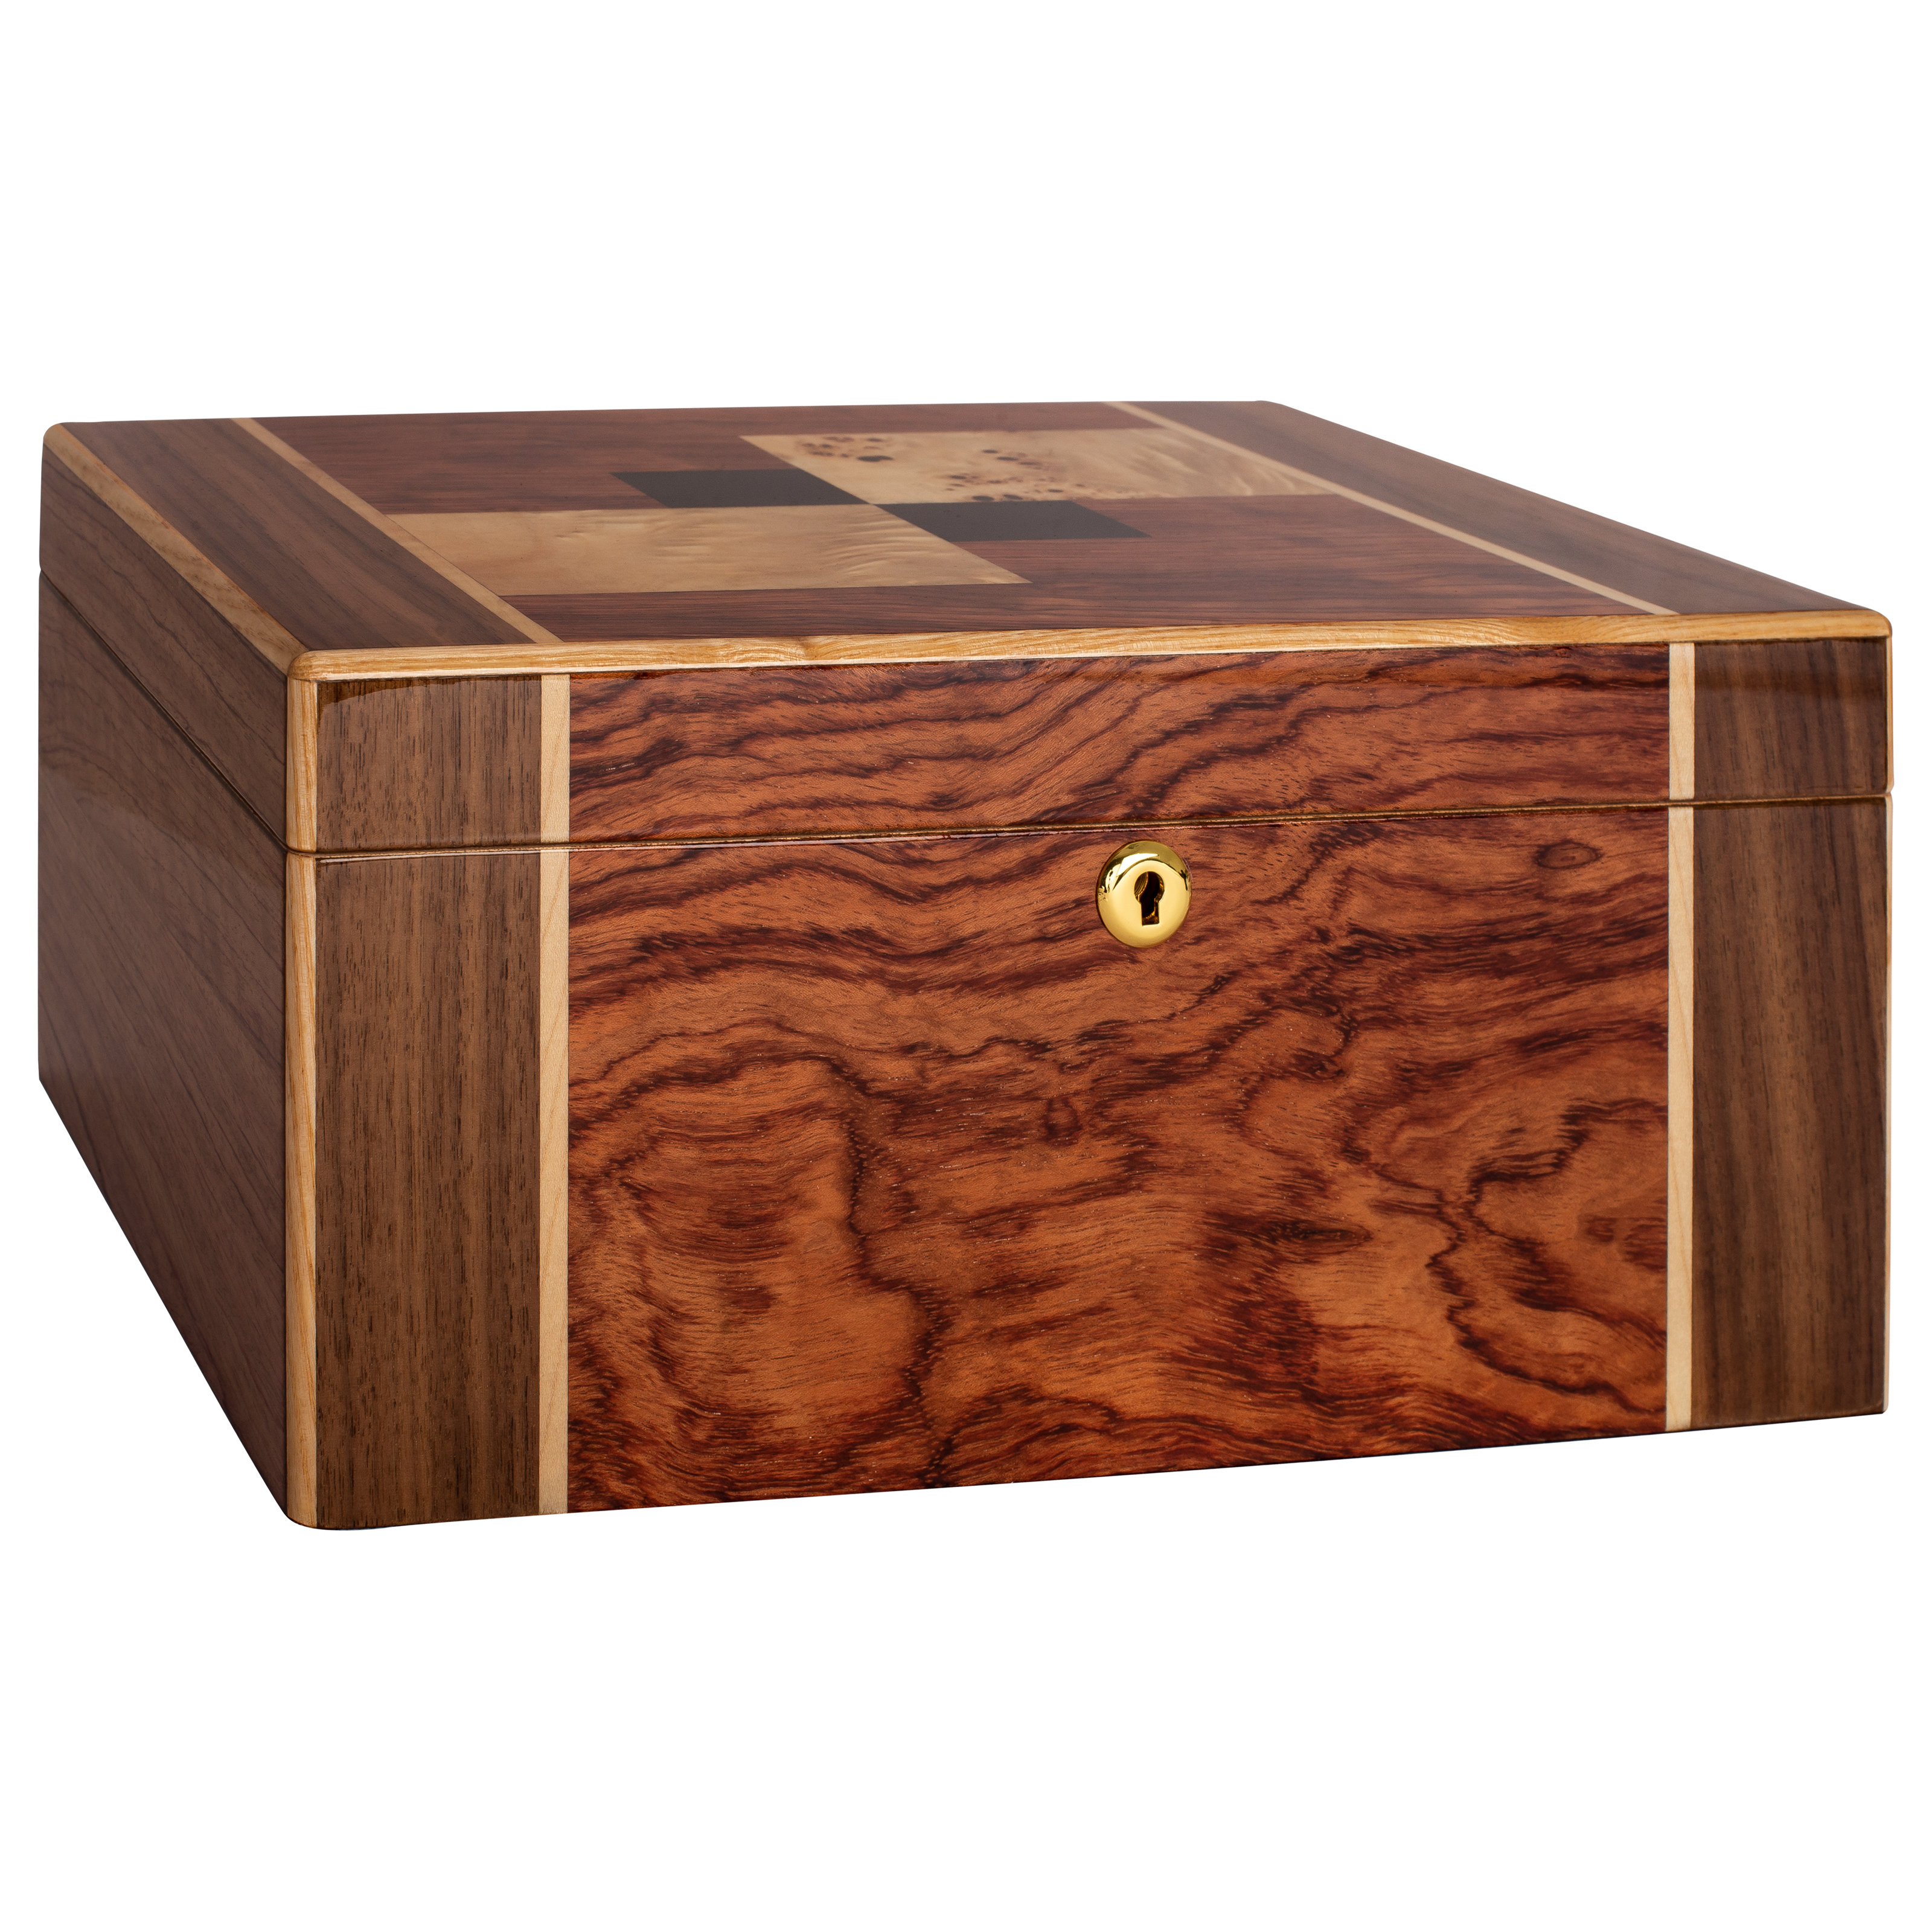 Editor's Picks: Cigar Humidor, Surfboard and Pure Gold Spectacles